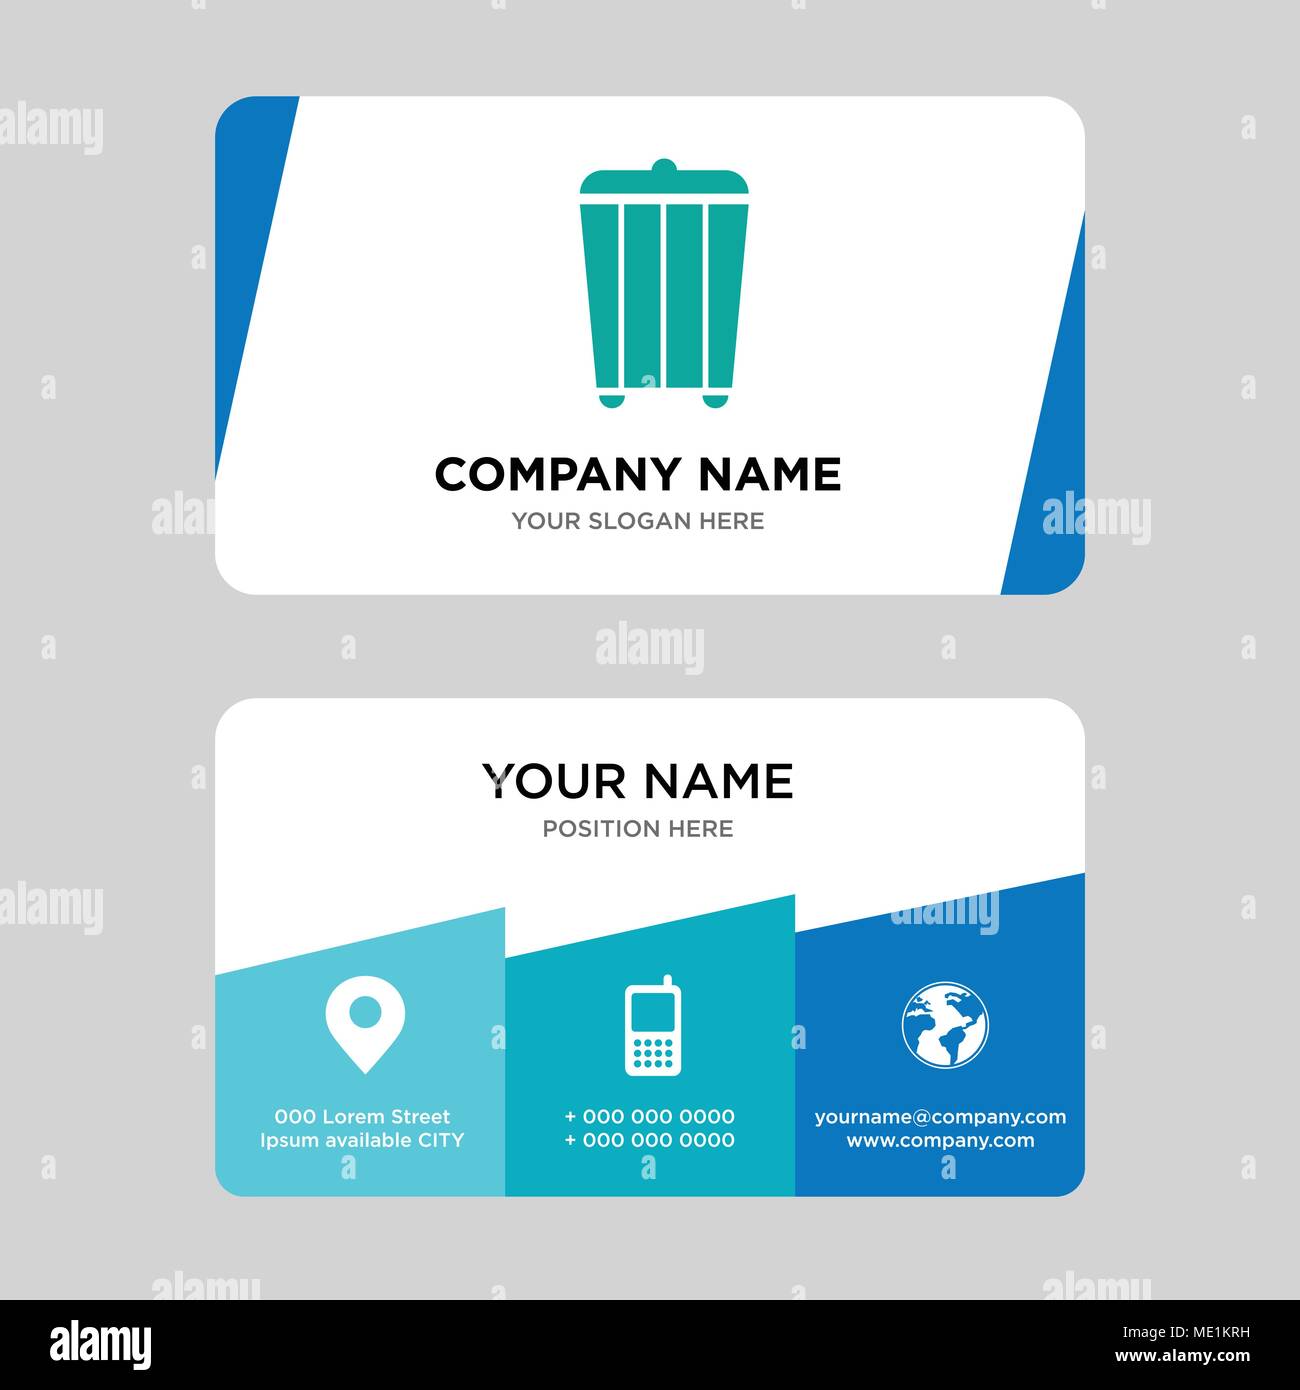 trash business card design template, Visiting for your company, Modern Creative and Clean identity Card Vector Illustration Stock Vector